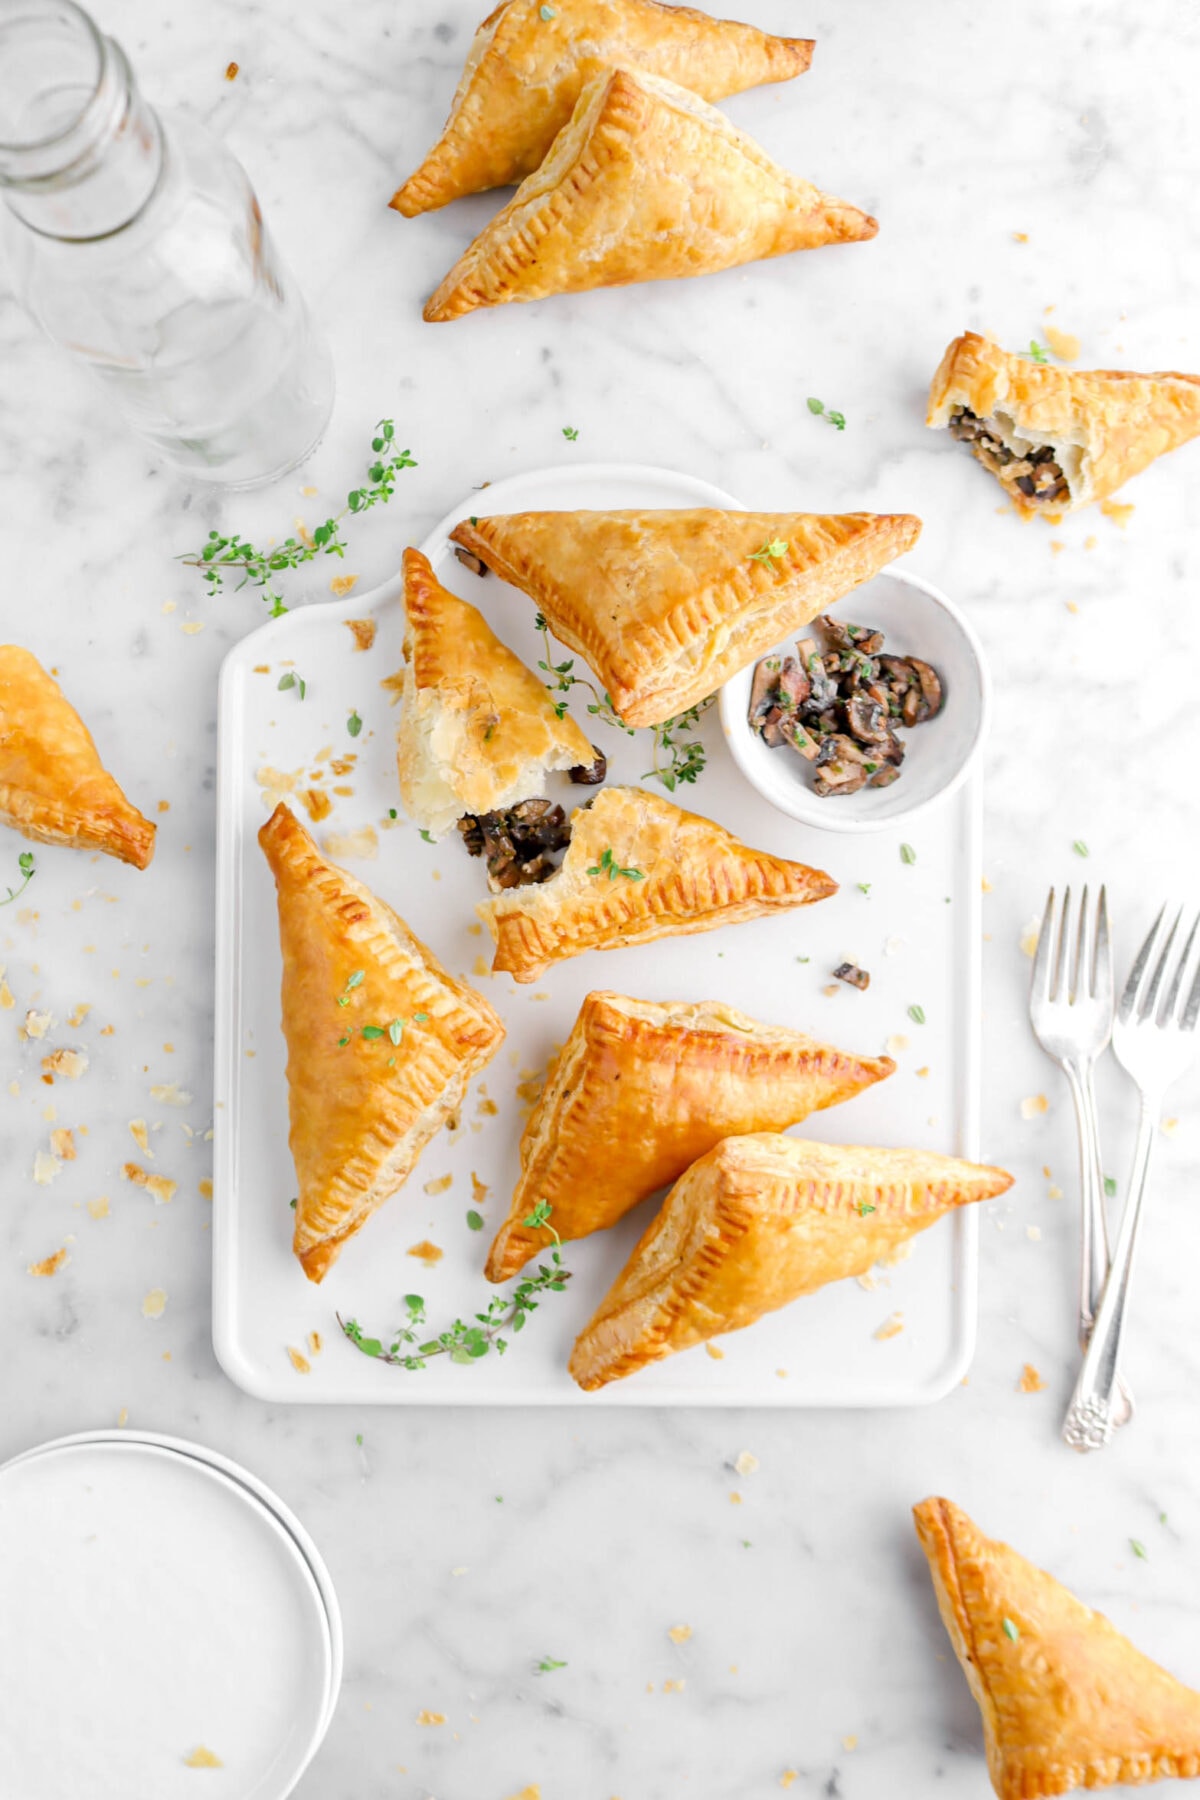 overhead shot of five turnovers on square serving tray, with one turnover broken open, a bowl of mushrooms, and thyme sprigs around